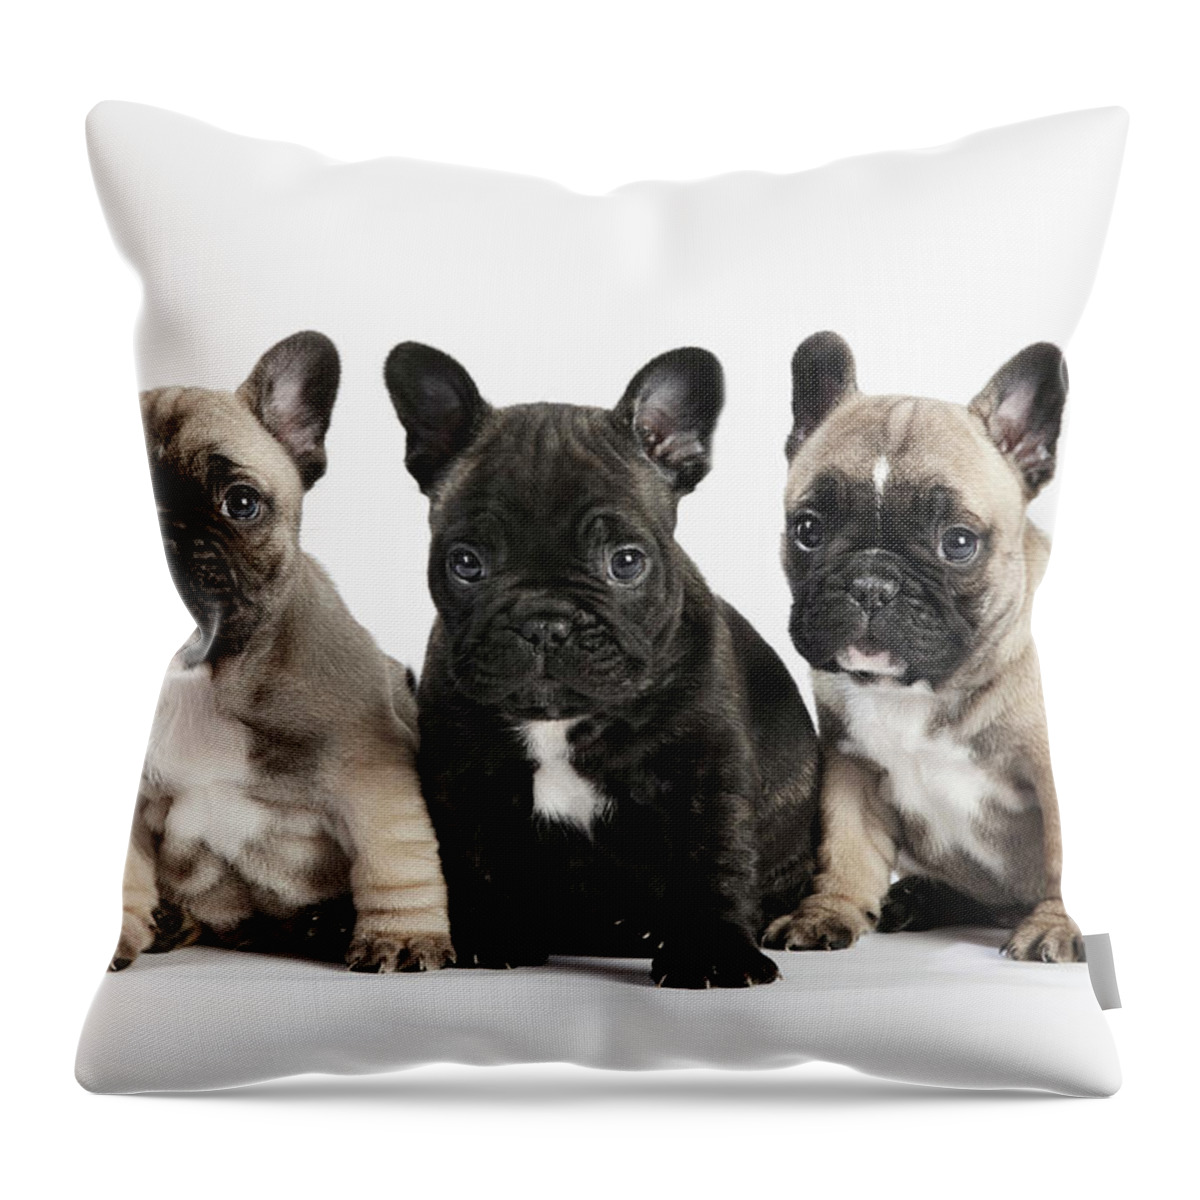 Pets Throw Pillow featuring the photograph Pedigree French Bulldog Puppies In A by Andrew Bret Wallis